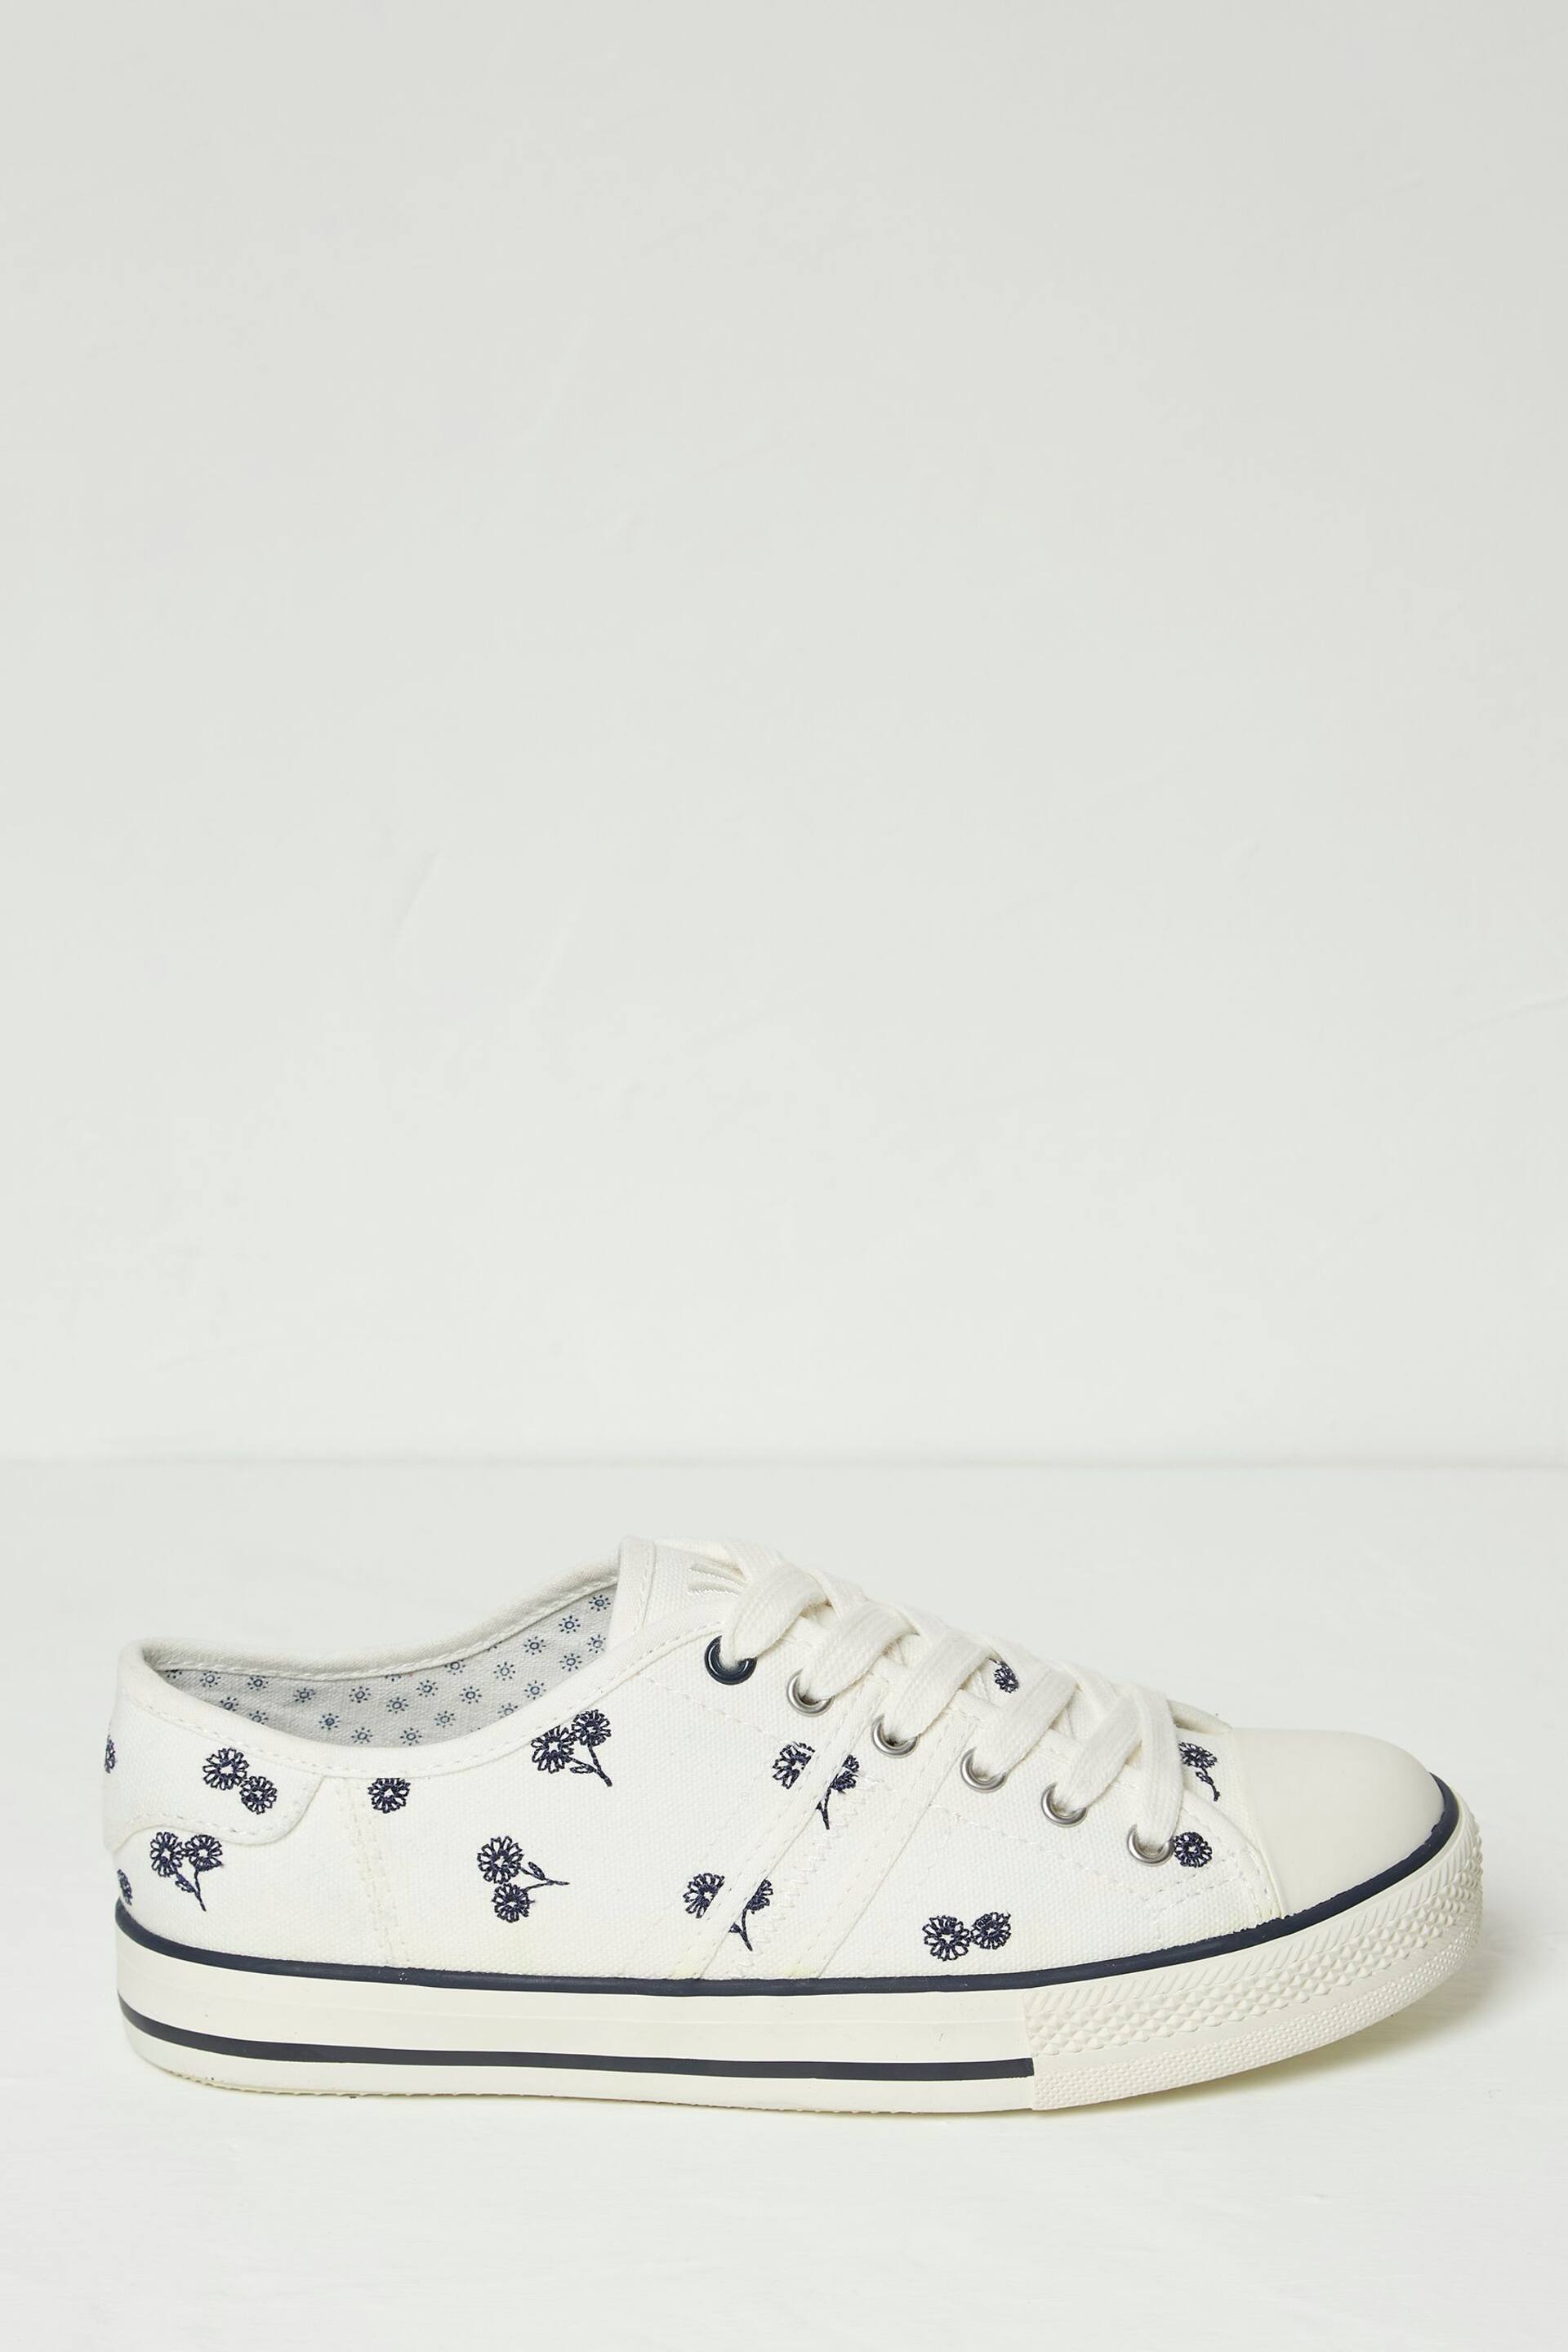 FatFace Natural Raya Canvas Lace Up Trainers - Image 1 of 3